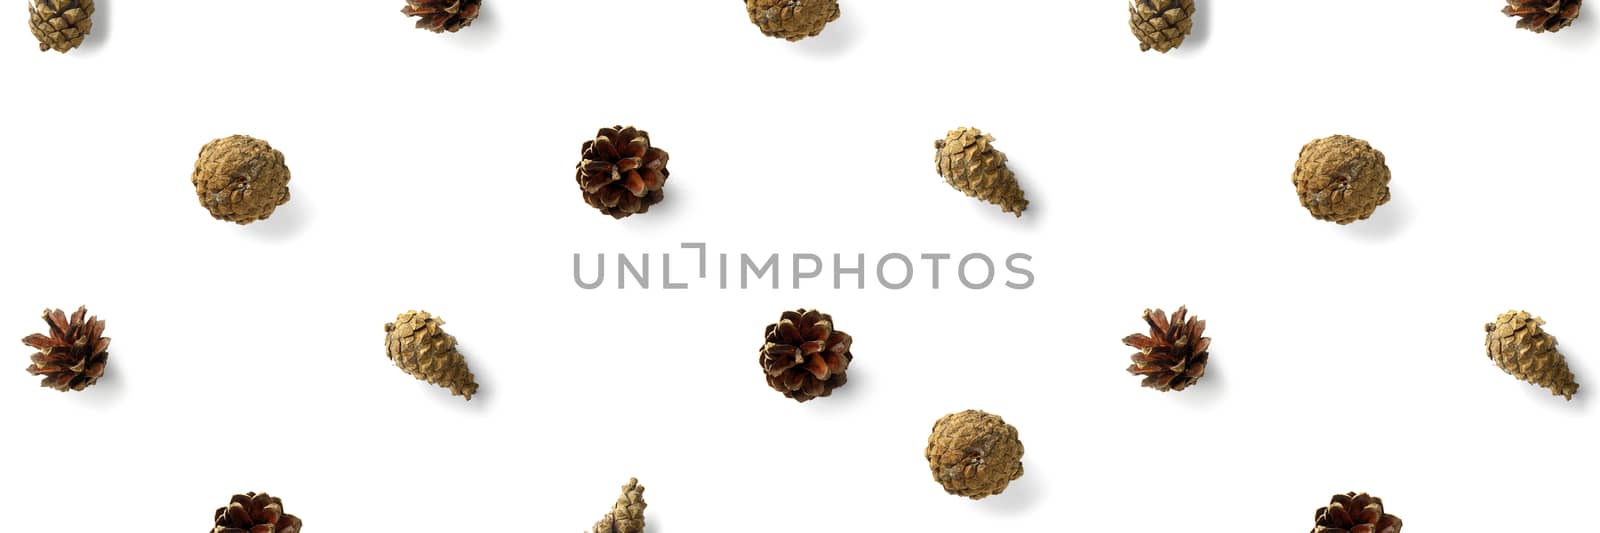 Pine cone Christmas background on white. Pine branches and cones. minimal creative cone arrangement pattern. flat lay, Modern christmas Background. by PhotoTime